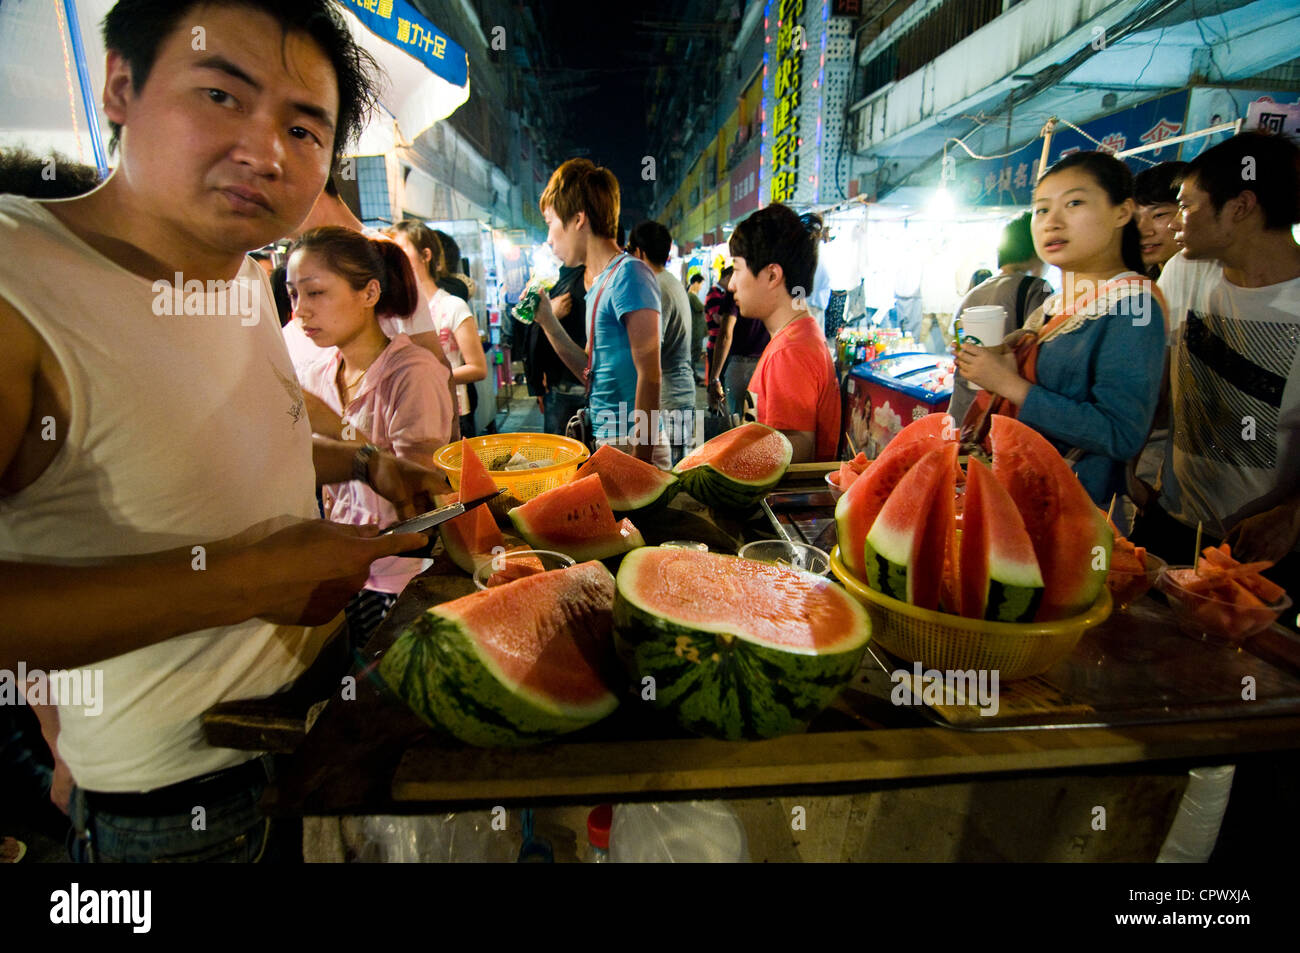 A watermelon vendor in the bustling night market in Wuhan, China. Stock Photo